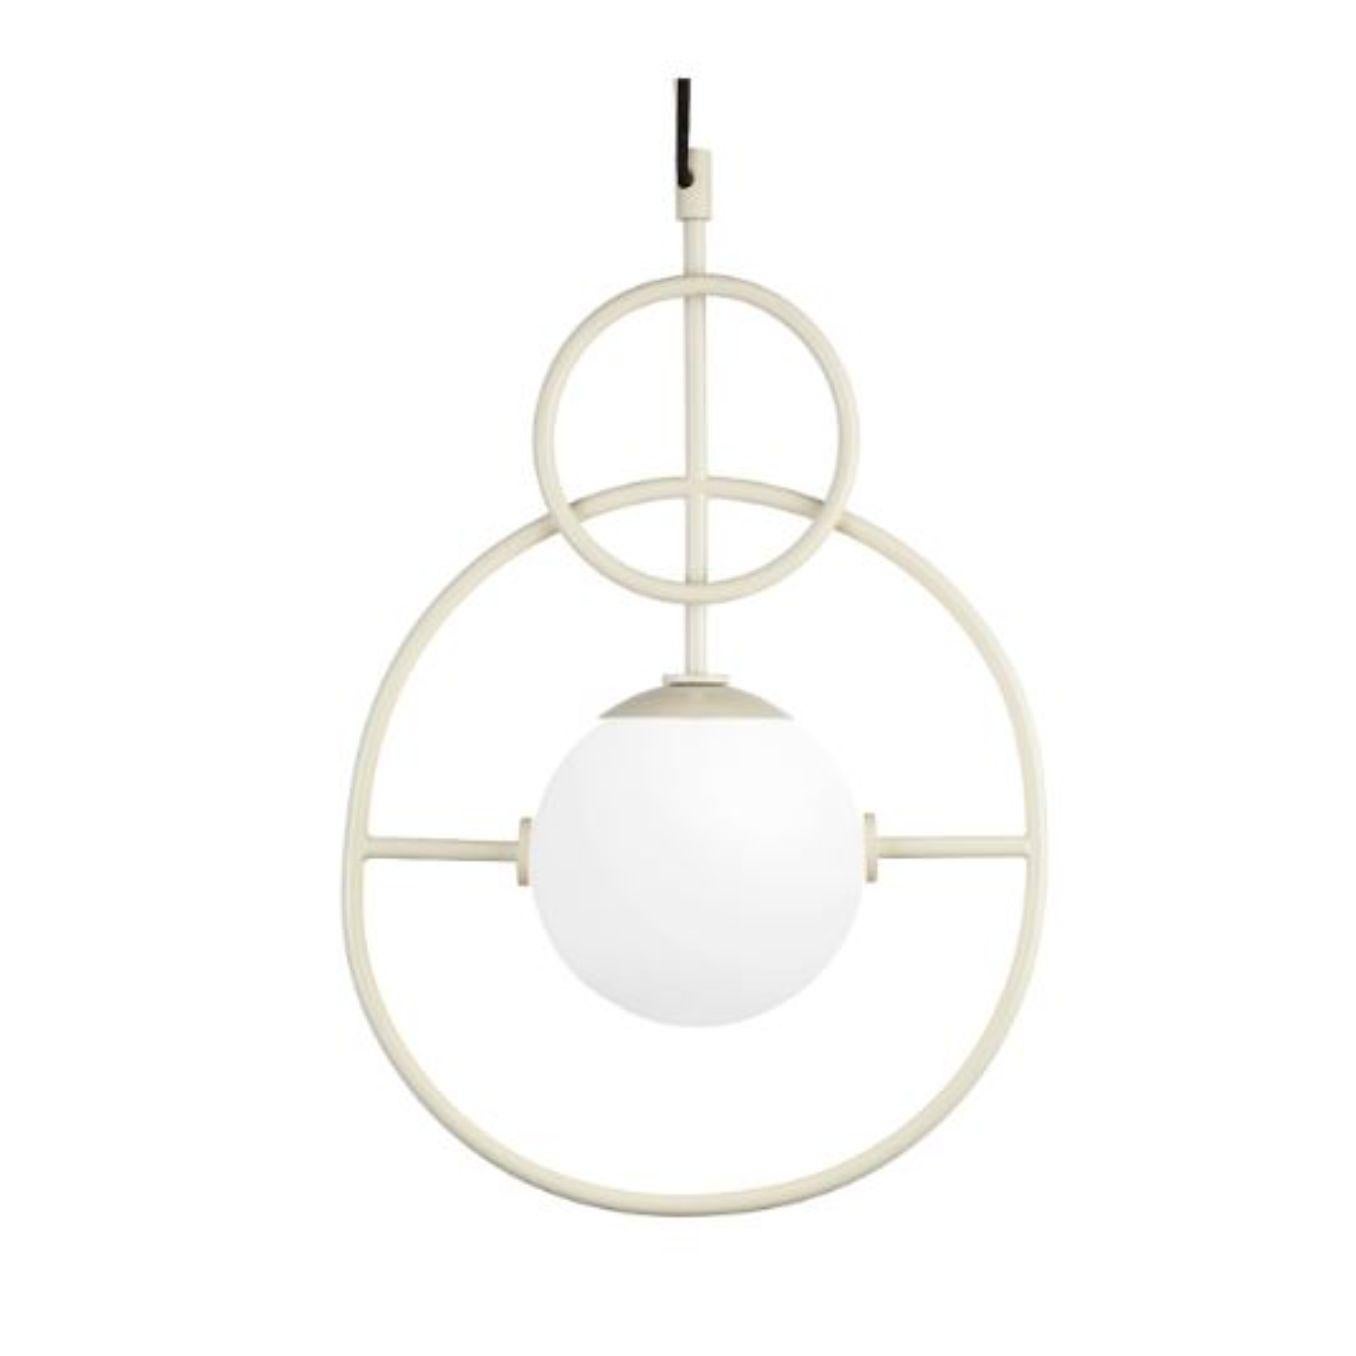 Portuguese Salmon Loop II Suspension Lamp by Dooq For Sale